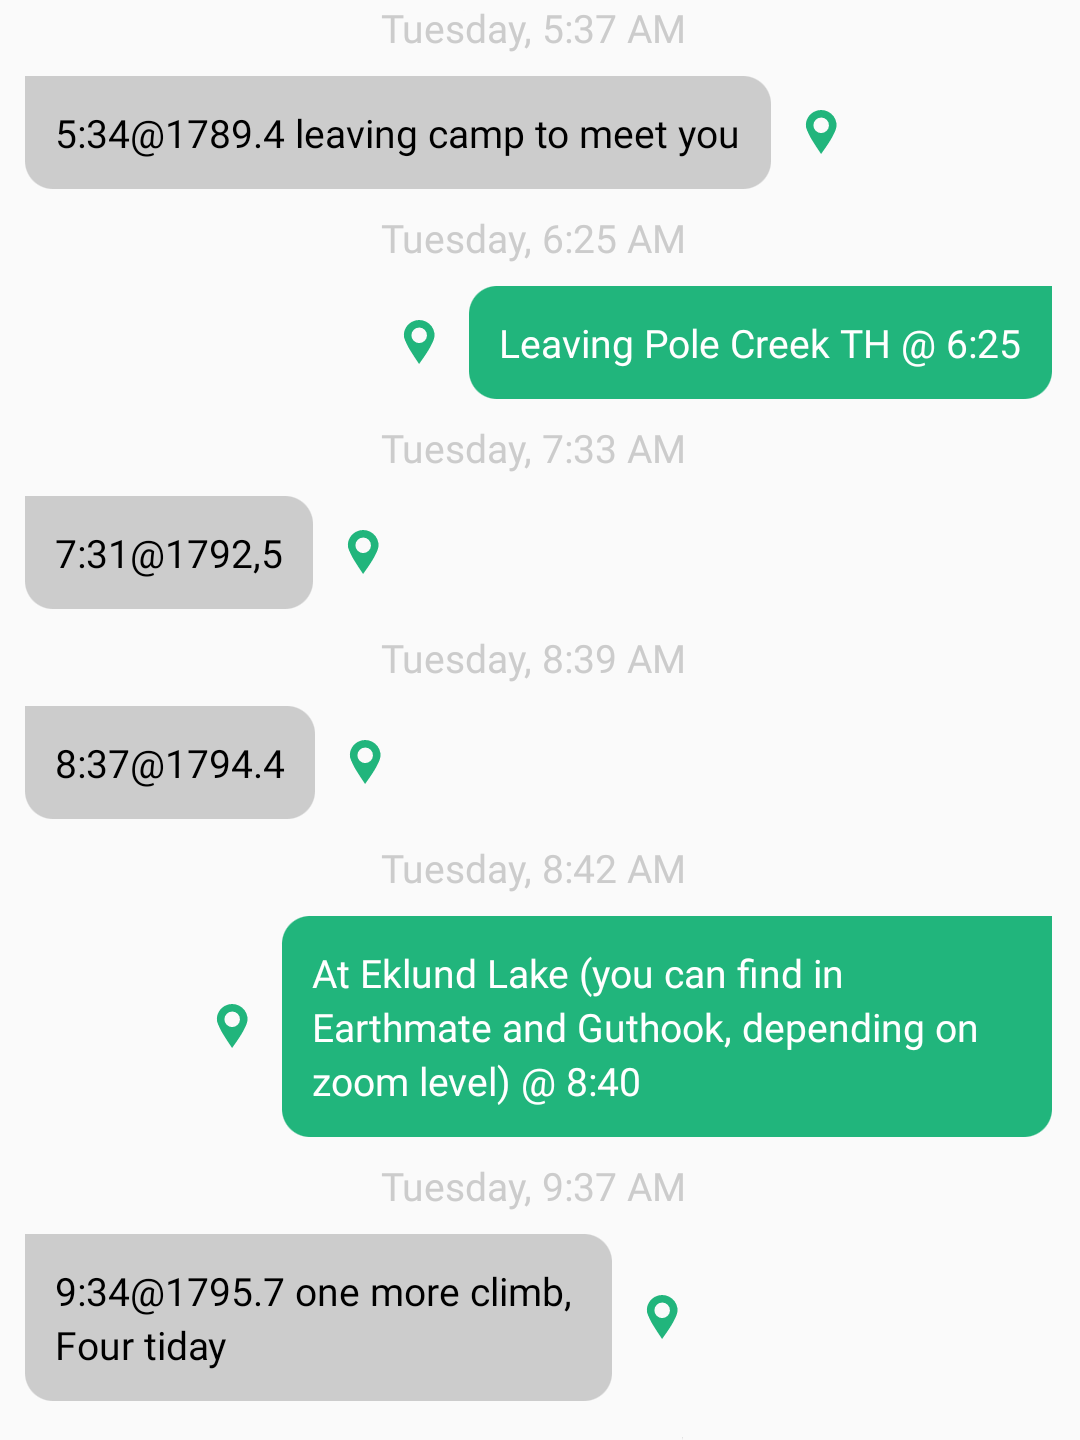 Screenshot of Earthmate messages with times and trail miles